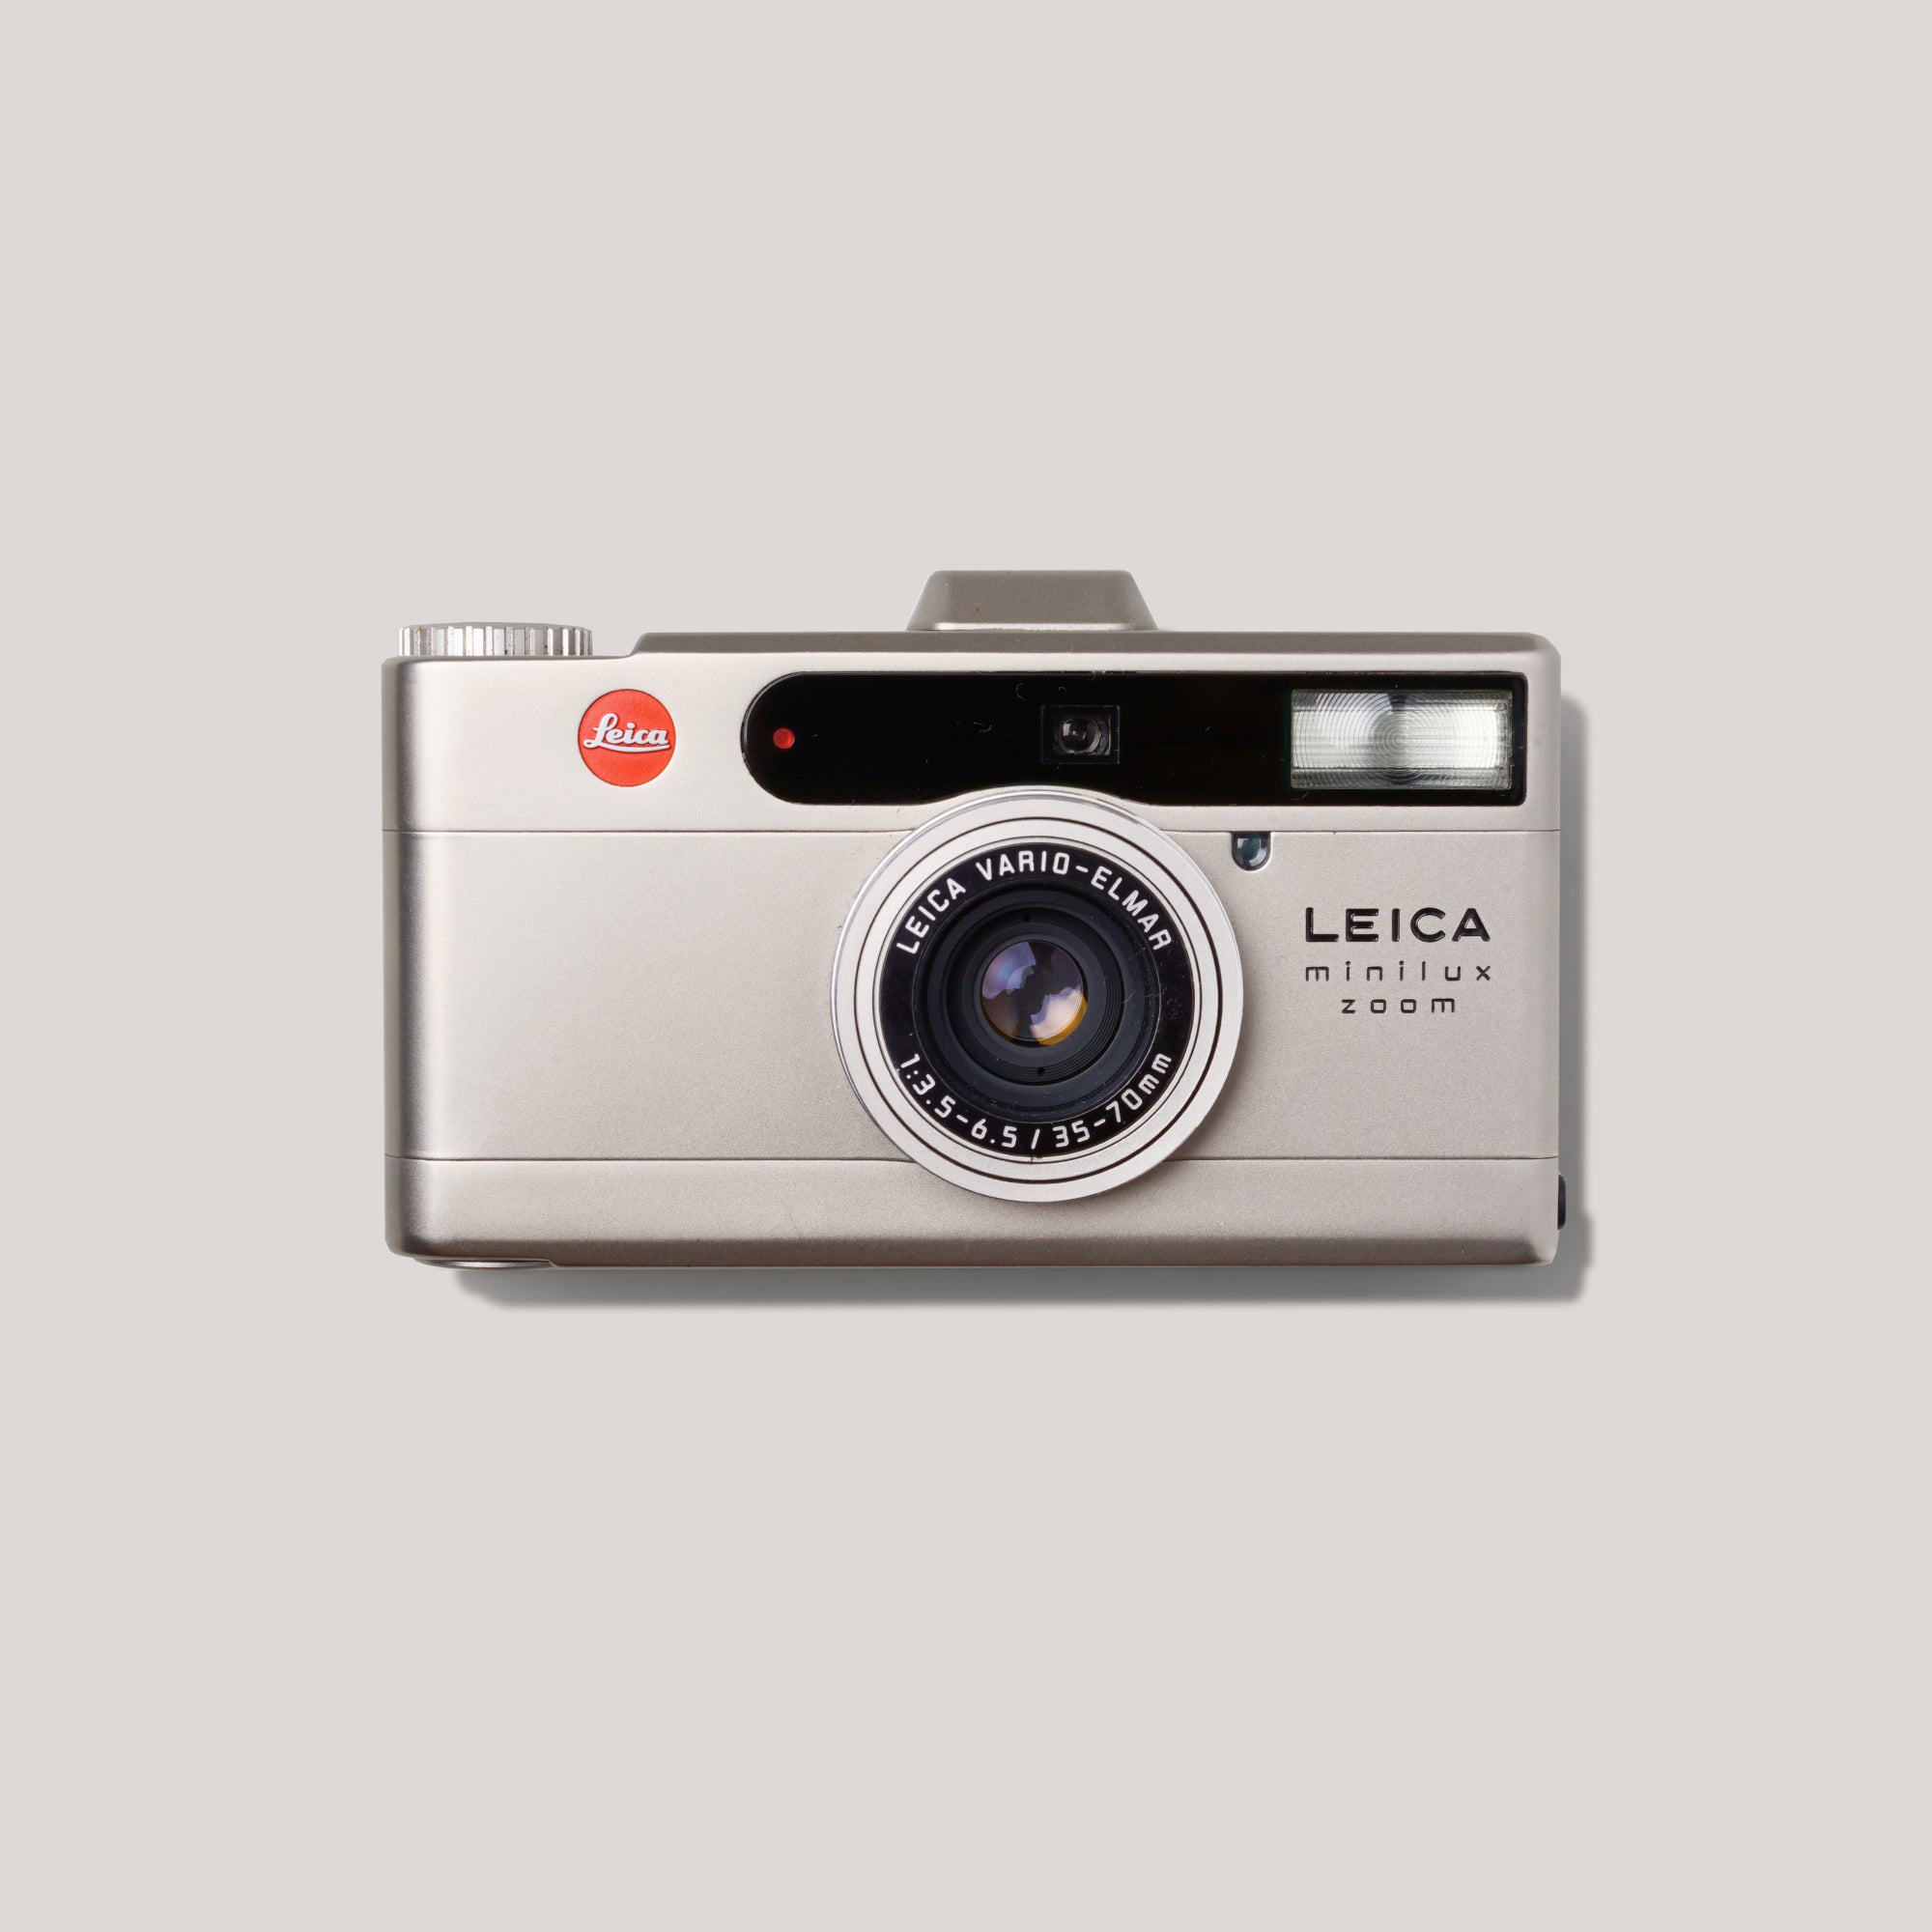 Buy Leica Minilux Zoom now at Analogue Amsterdam